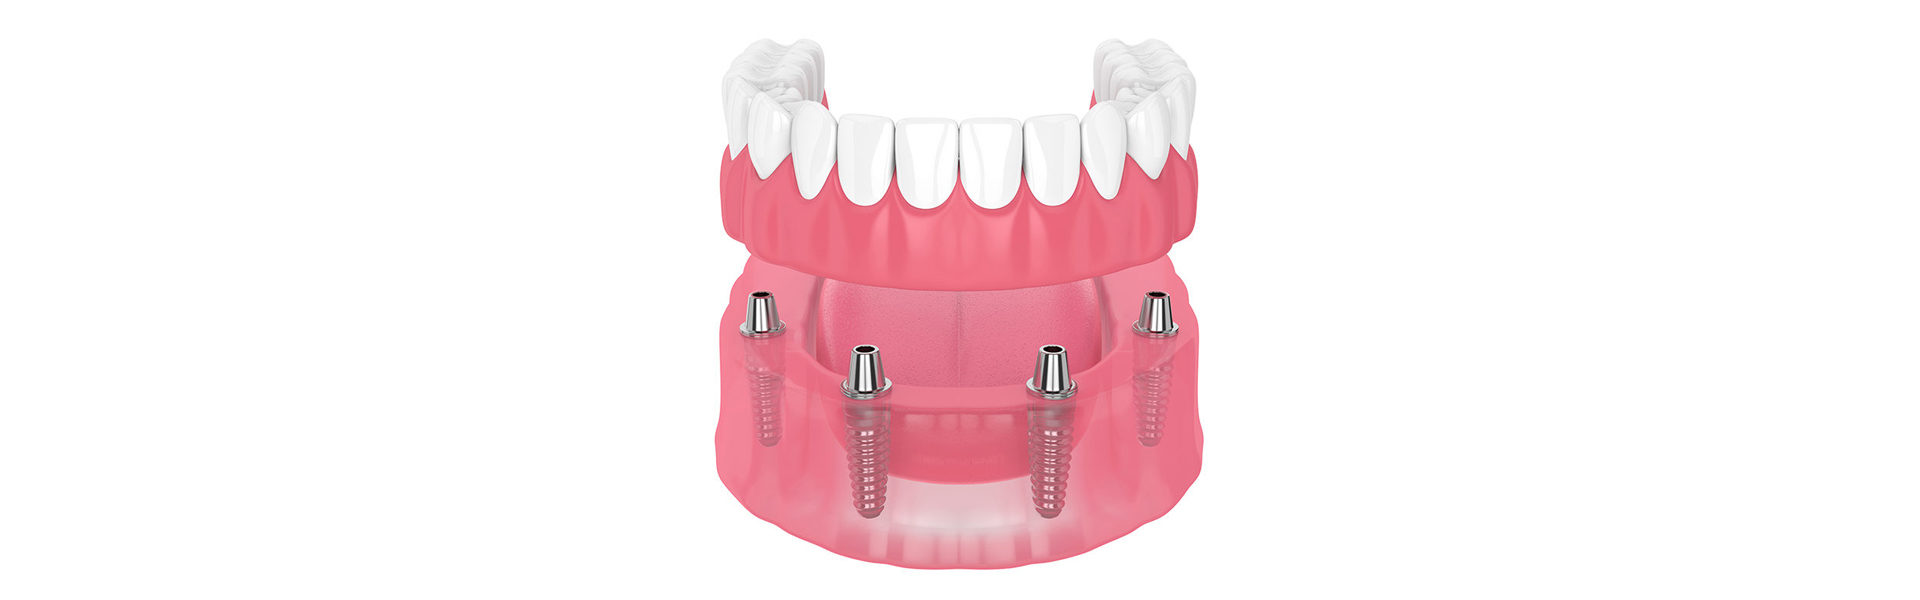 Implant Retained Dentures in Portland, OR